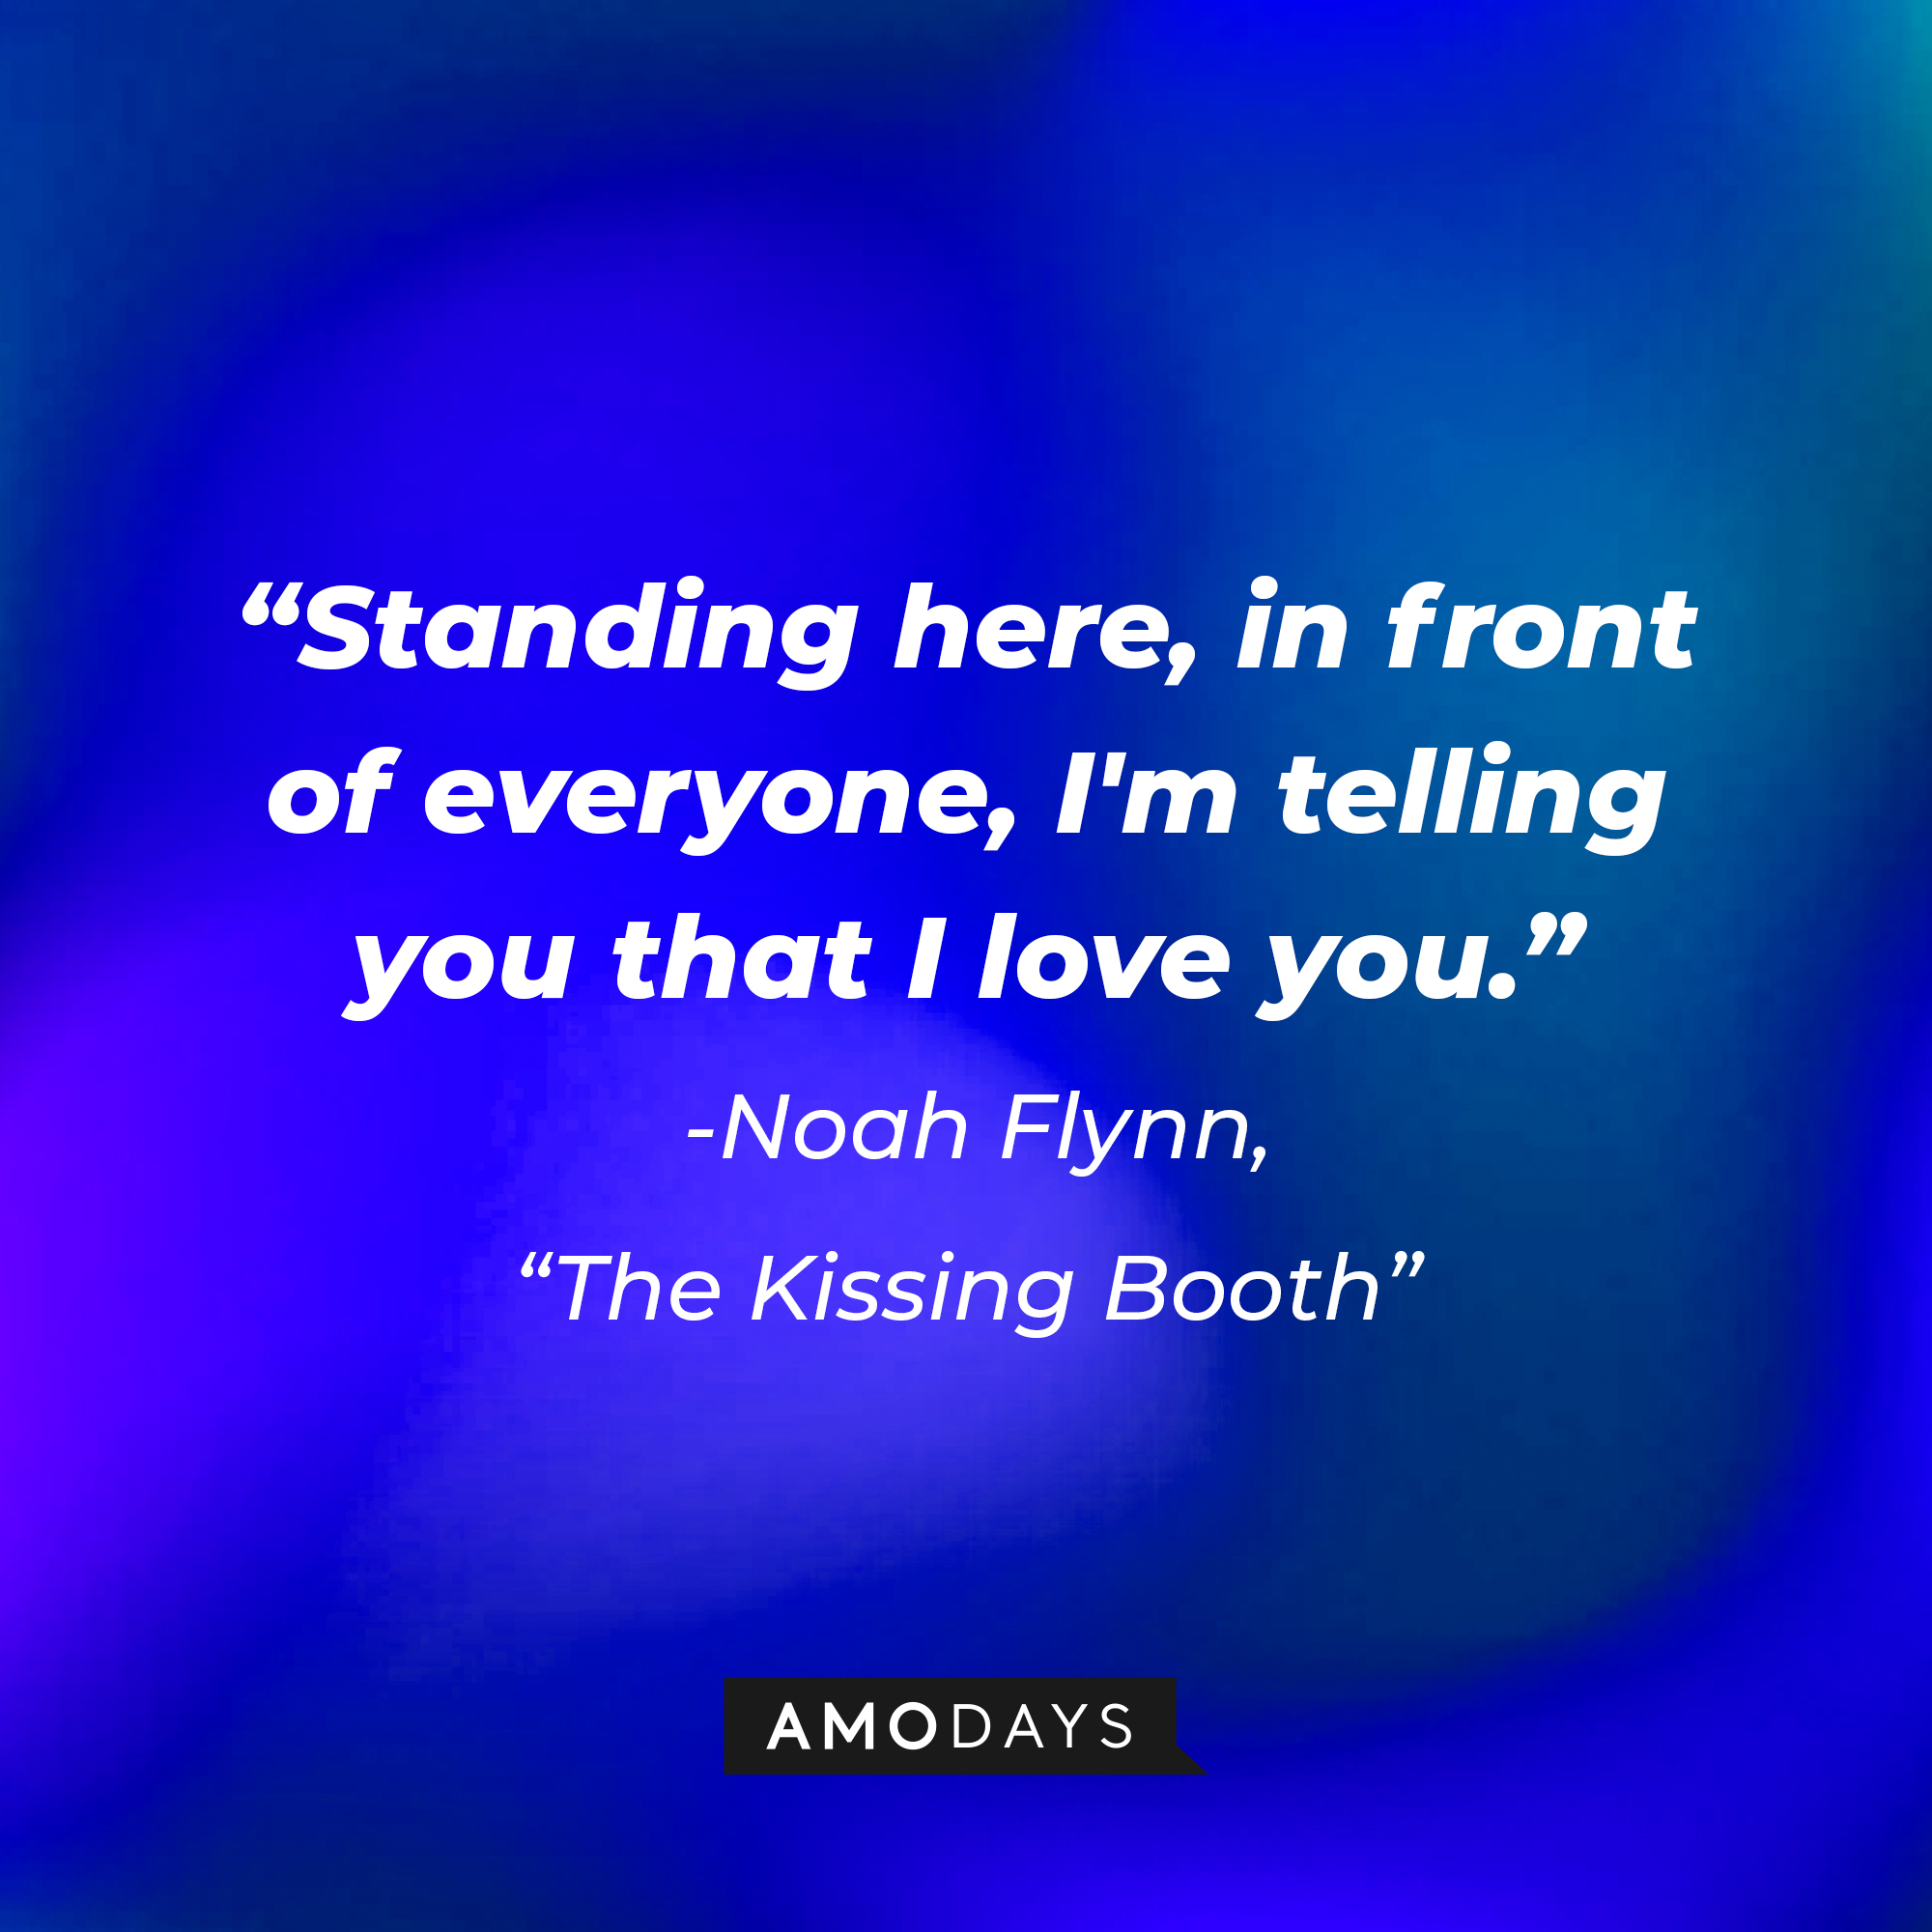 Noah Flynn’s quote: "Standing here, in front of everyone, I'm telling you that I love you." | Image: AmoDays